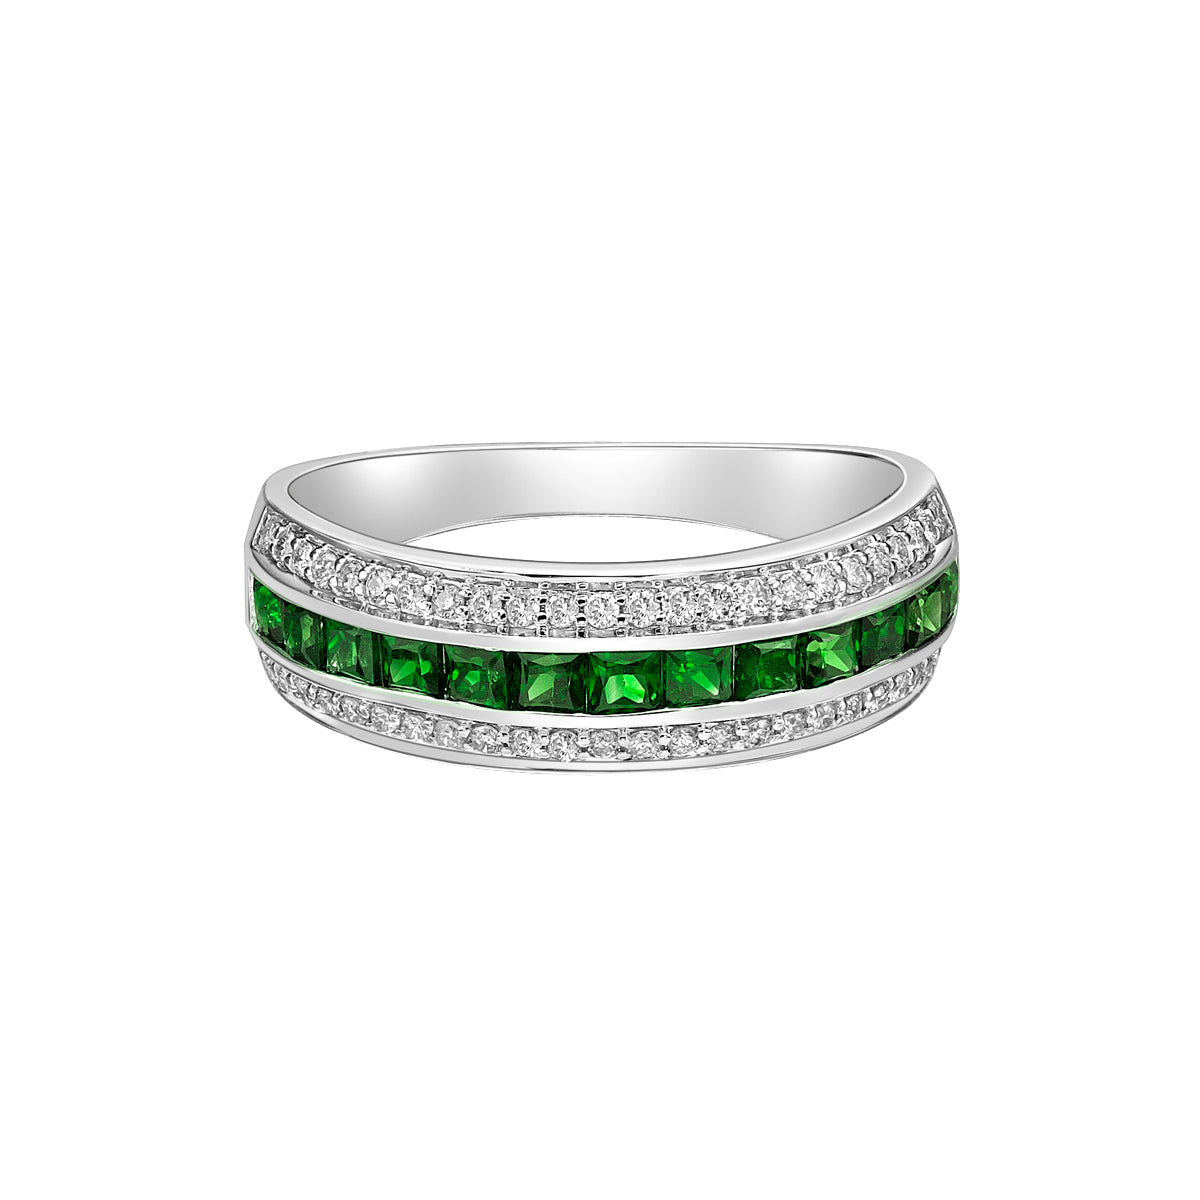 14K White Gold Channel-set Emerald ring with Diamonds